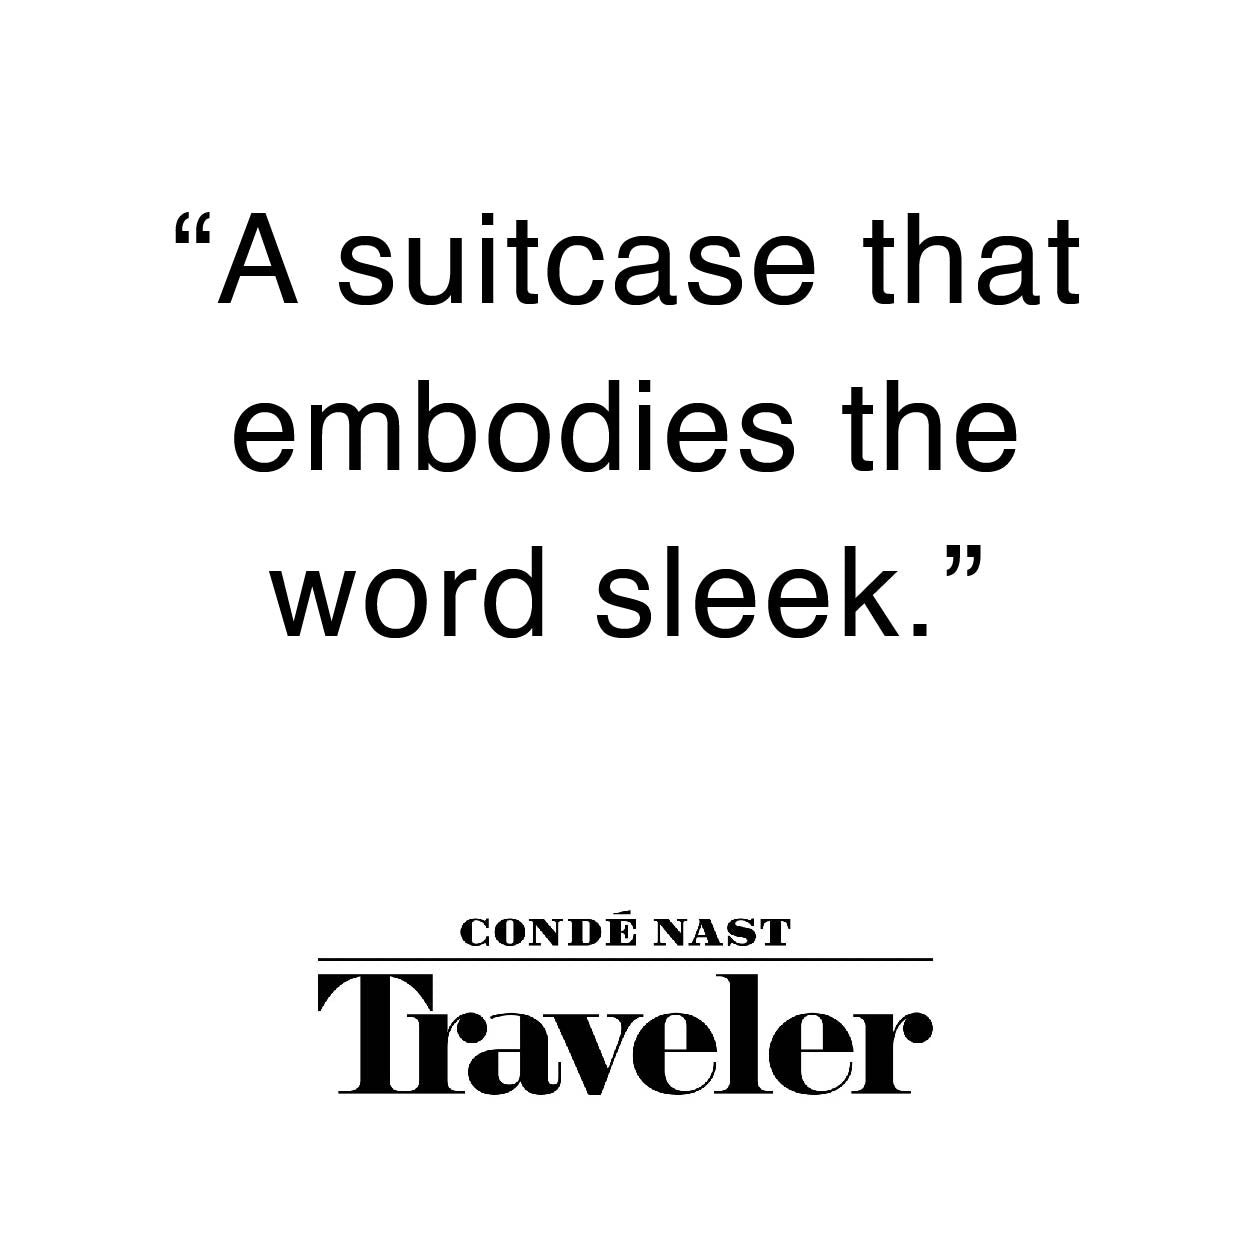 conde nast traveler press quote: a suitcase than embodies the world sleek. 